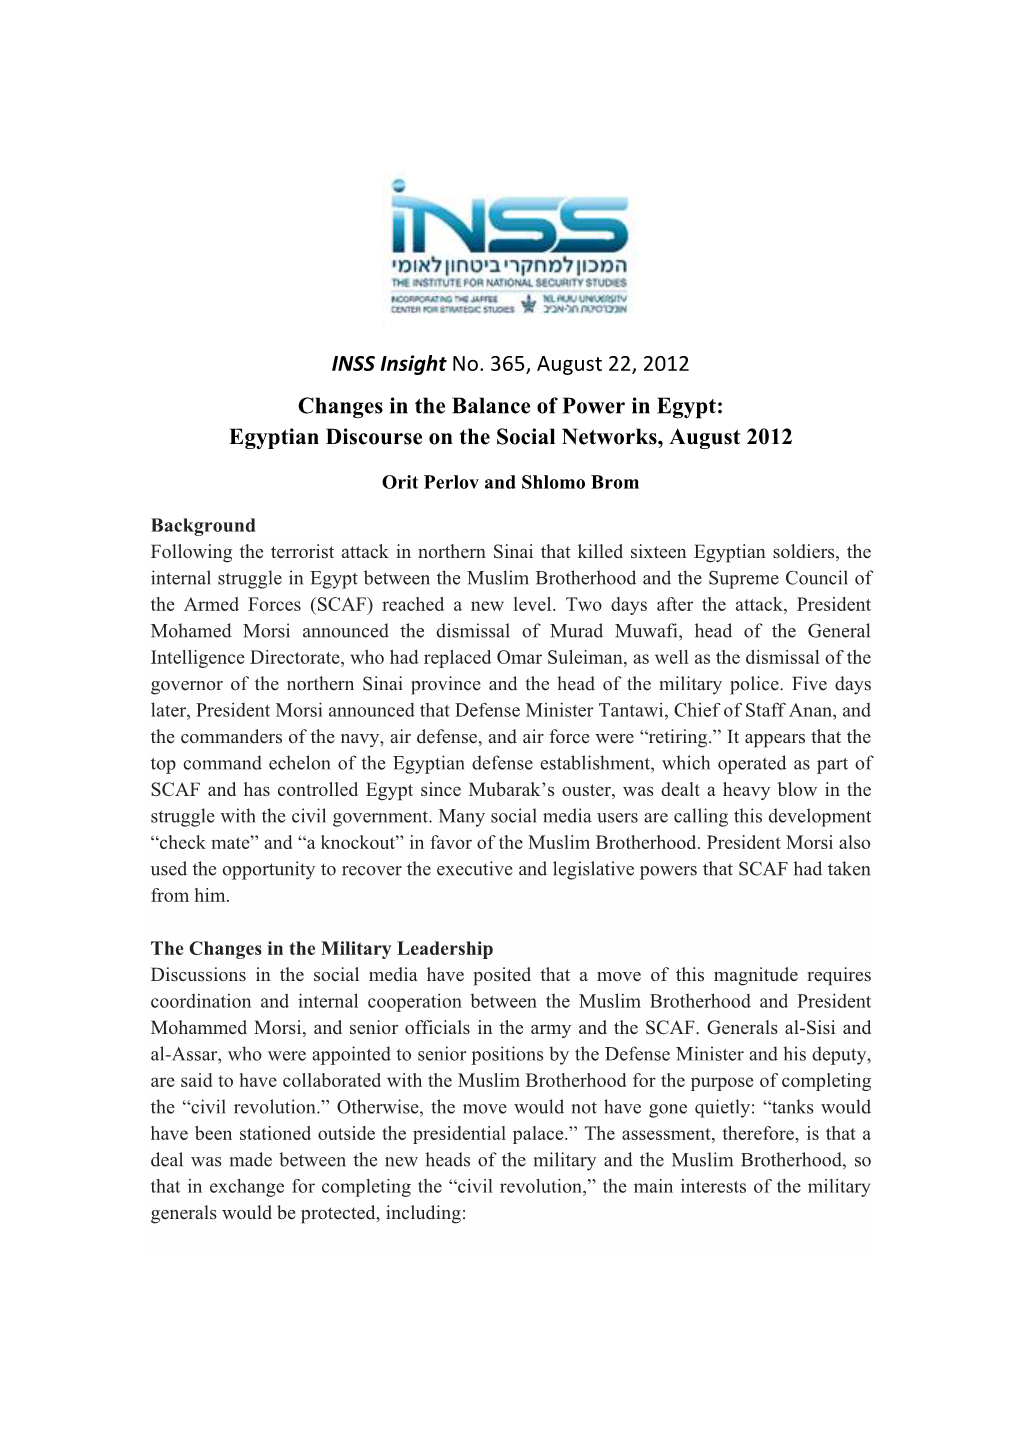 Changes in the Balance of Power in Egypt: Egyptian Discourse on the Social Networks, August 2012